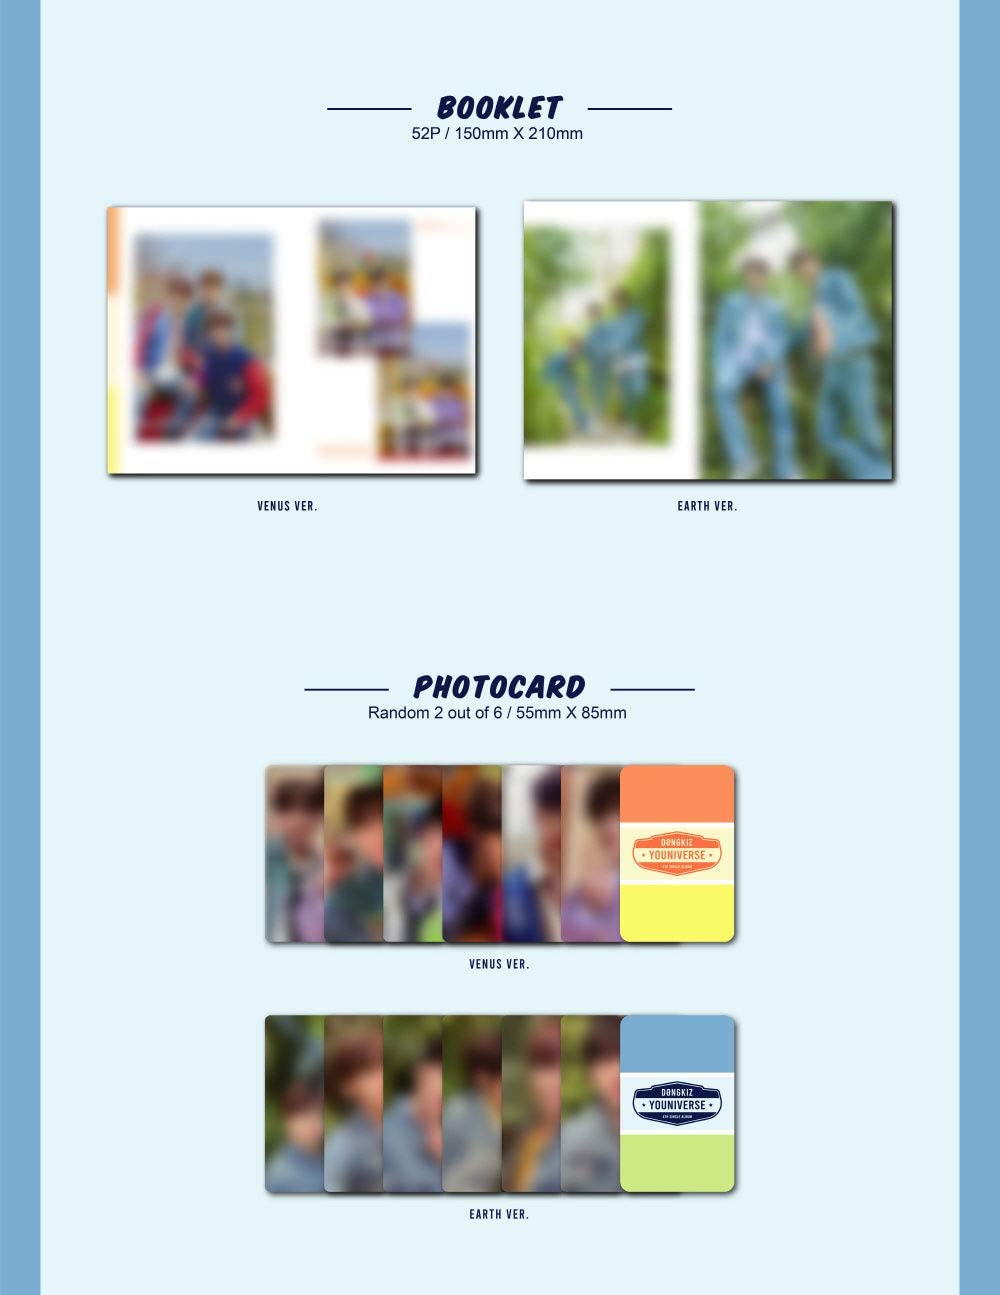 1 CD
1 Booklet (52 pages)
2 Photo Cards
1 ID Picture
1 Sticker
1 Bookmark